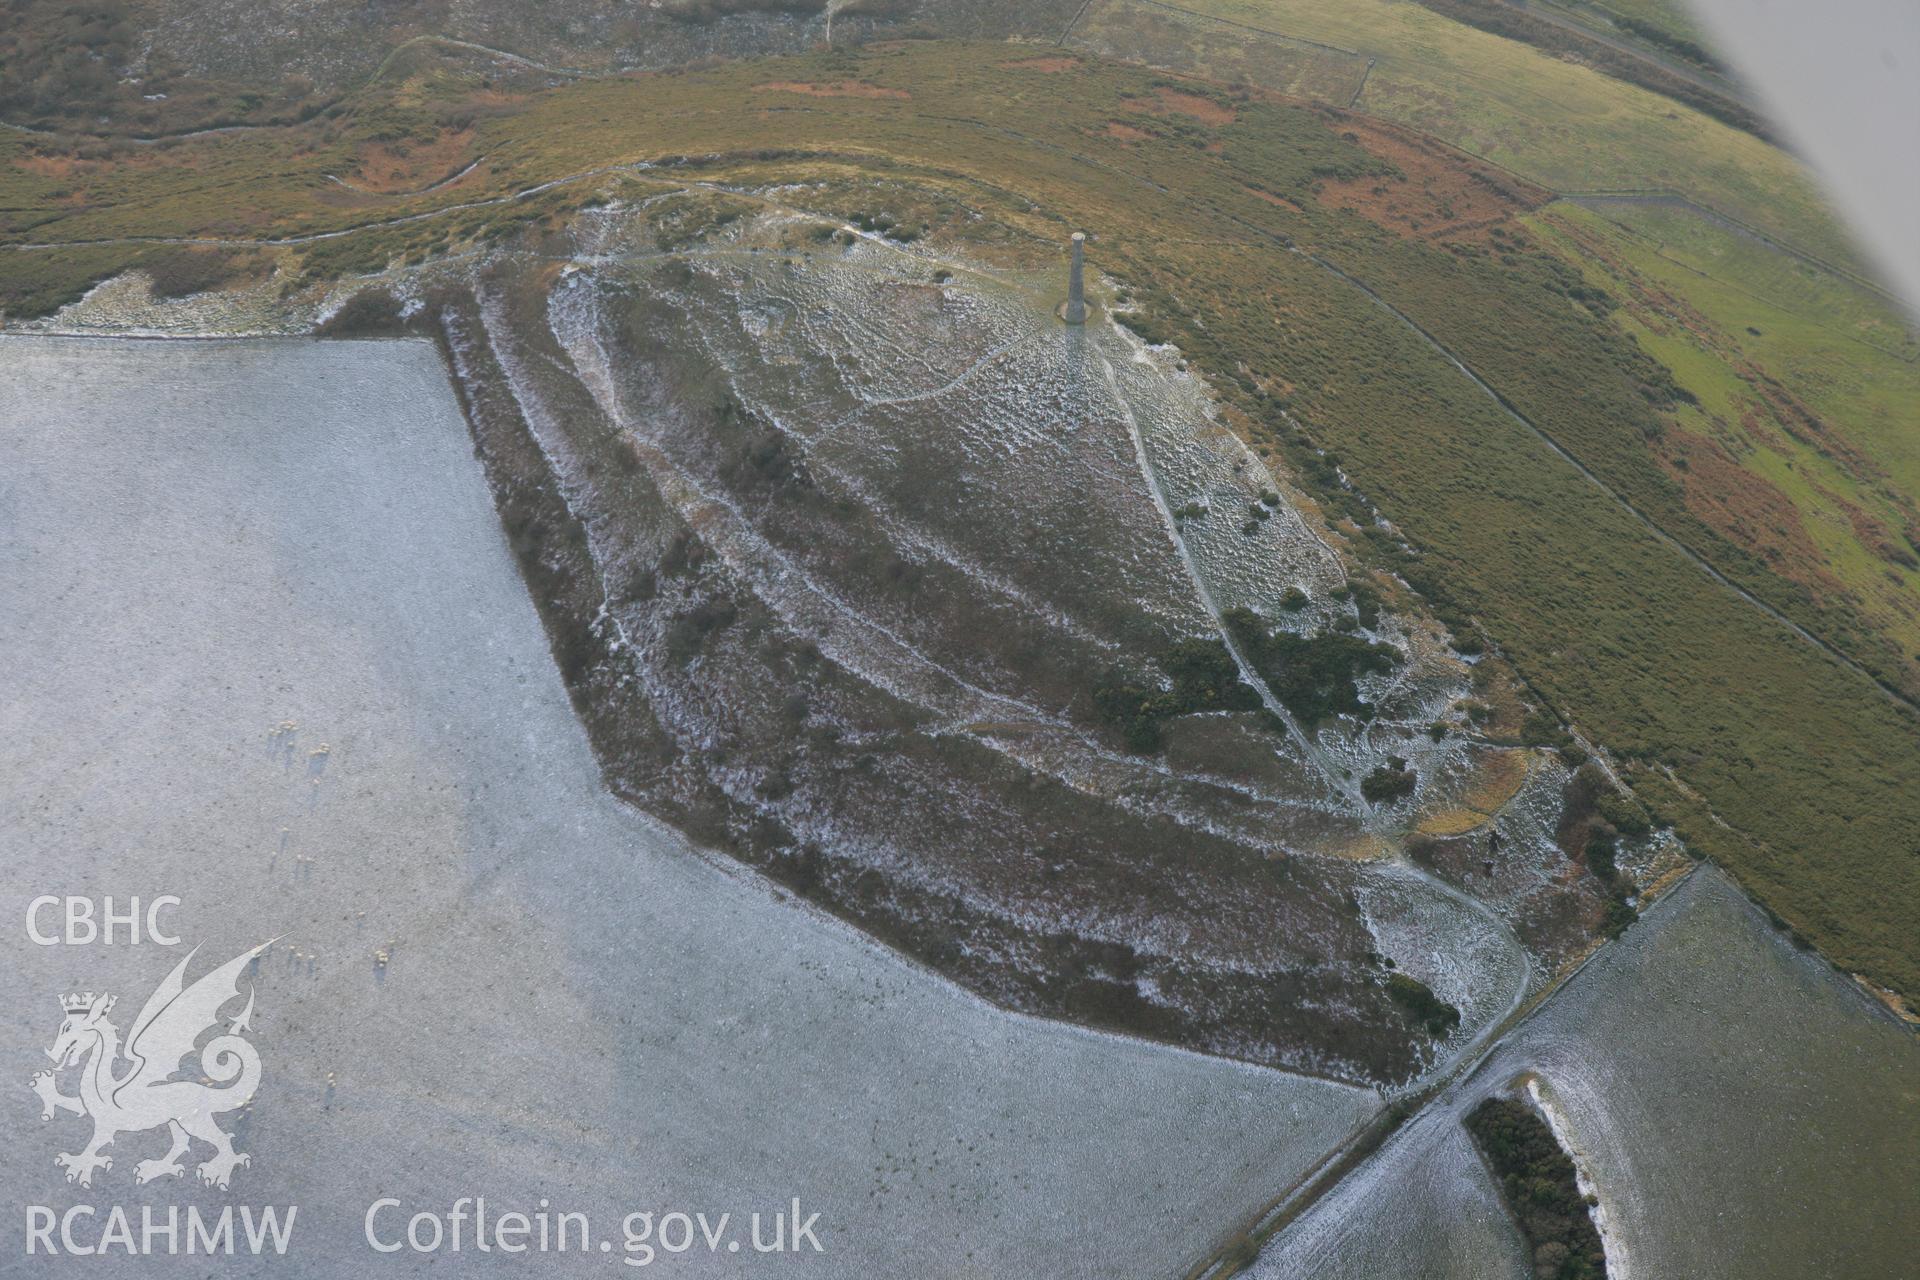 RCAHMW colour oblique photograph of Pen Dinas hillfort, with snow. Taken by Toby Driver on 02/12/2010.